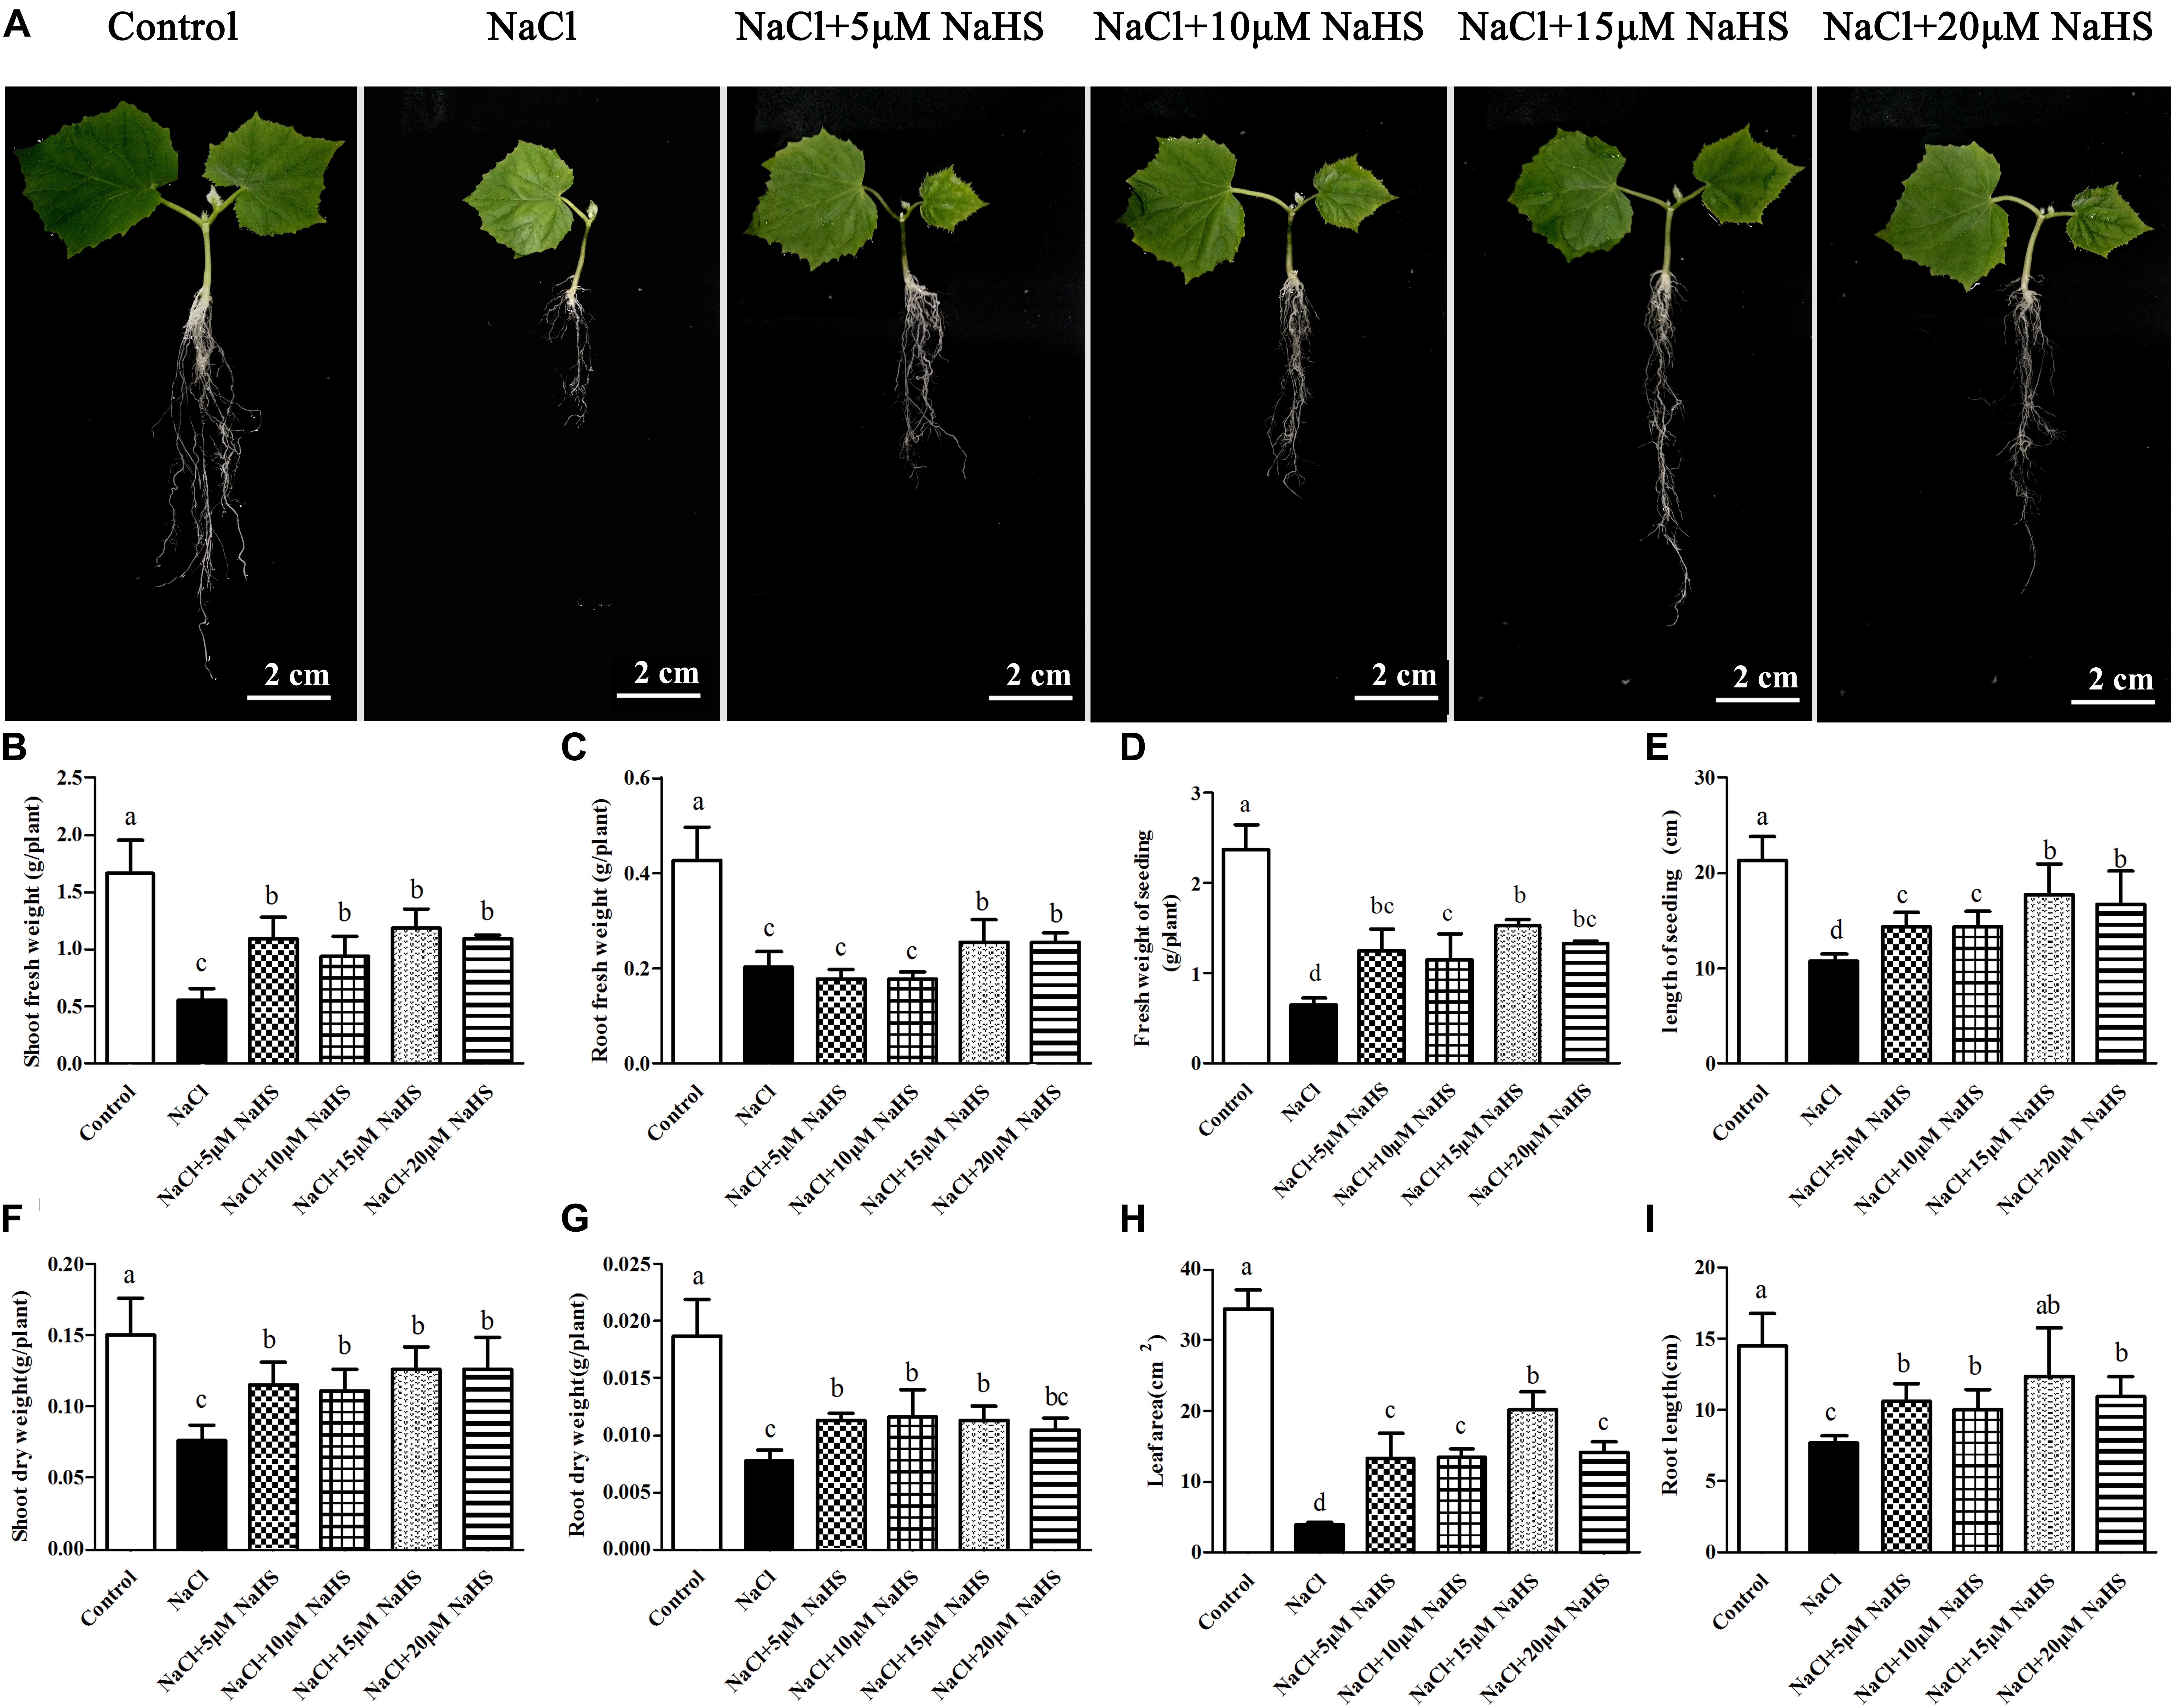 Frontiers | H2S Alleviates Salinity Stress in Cucumber by 